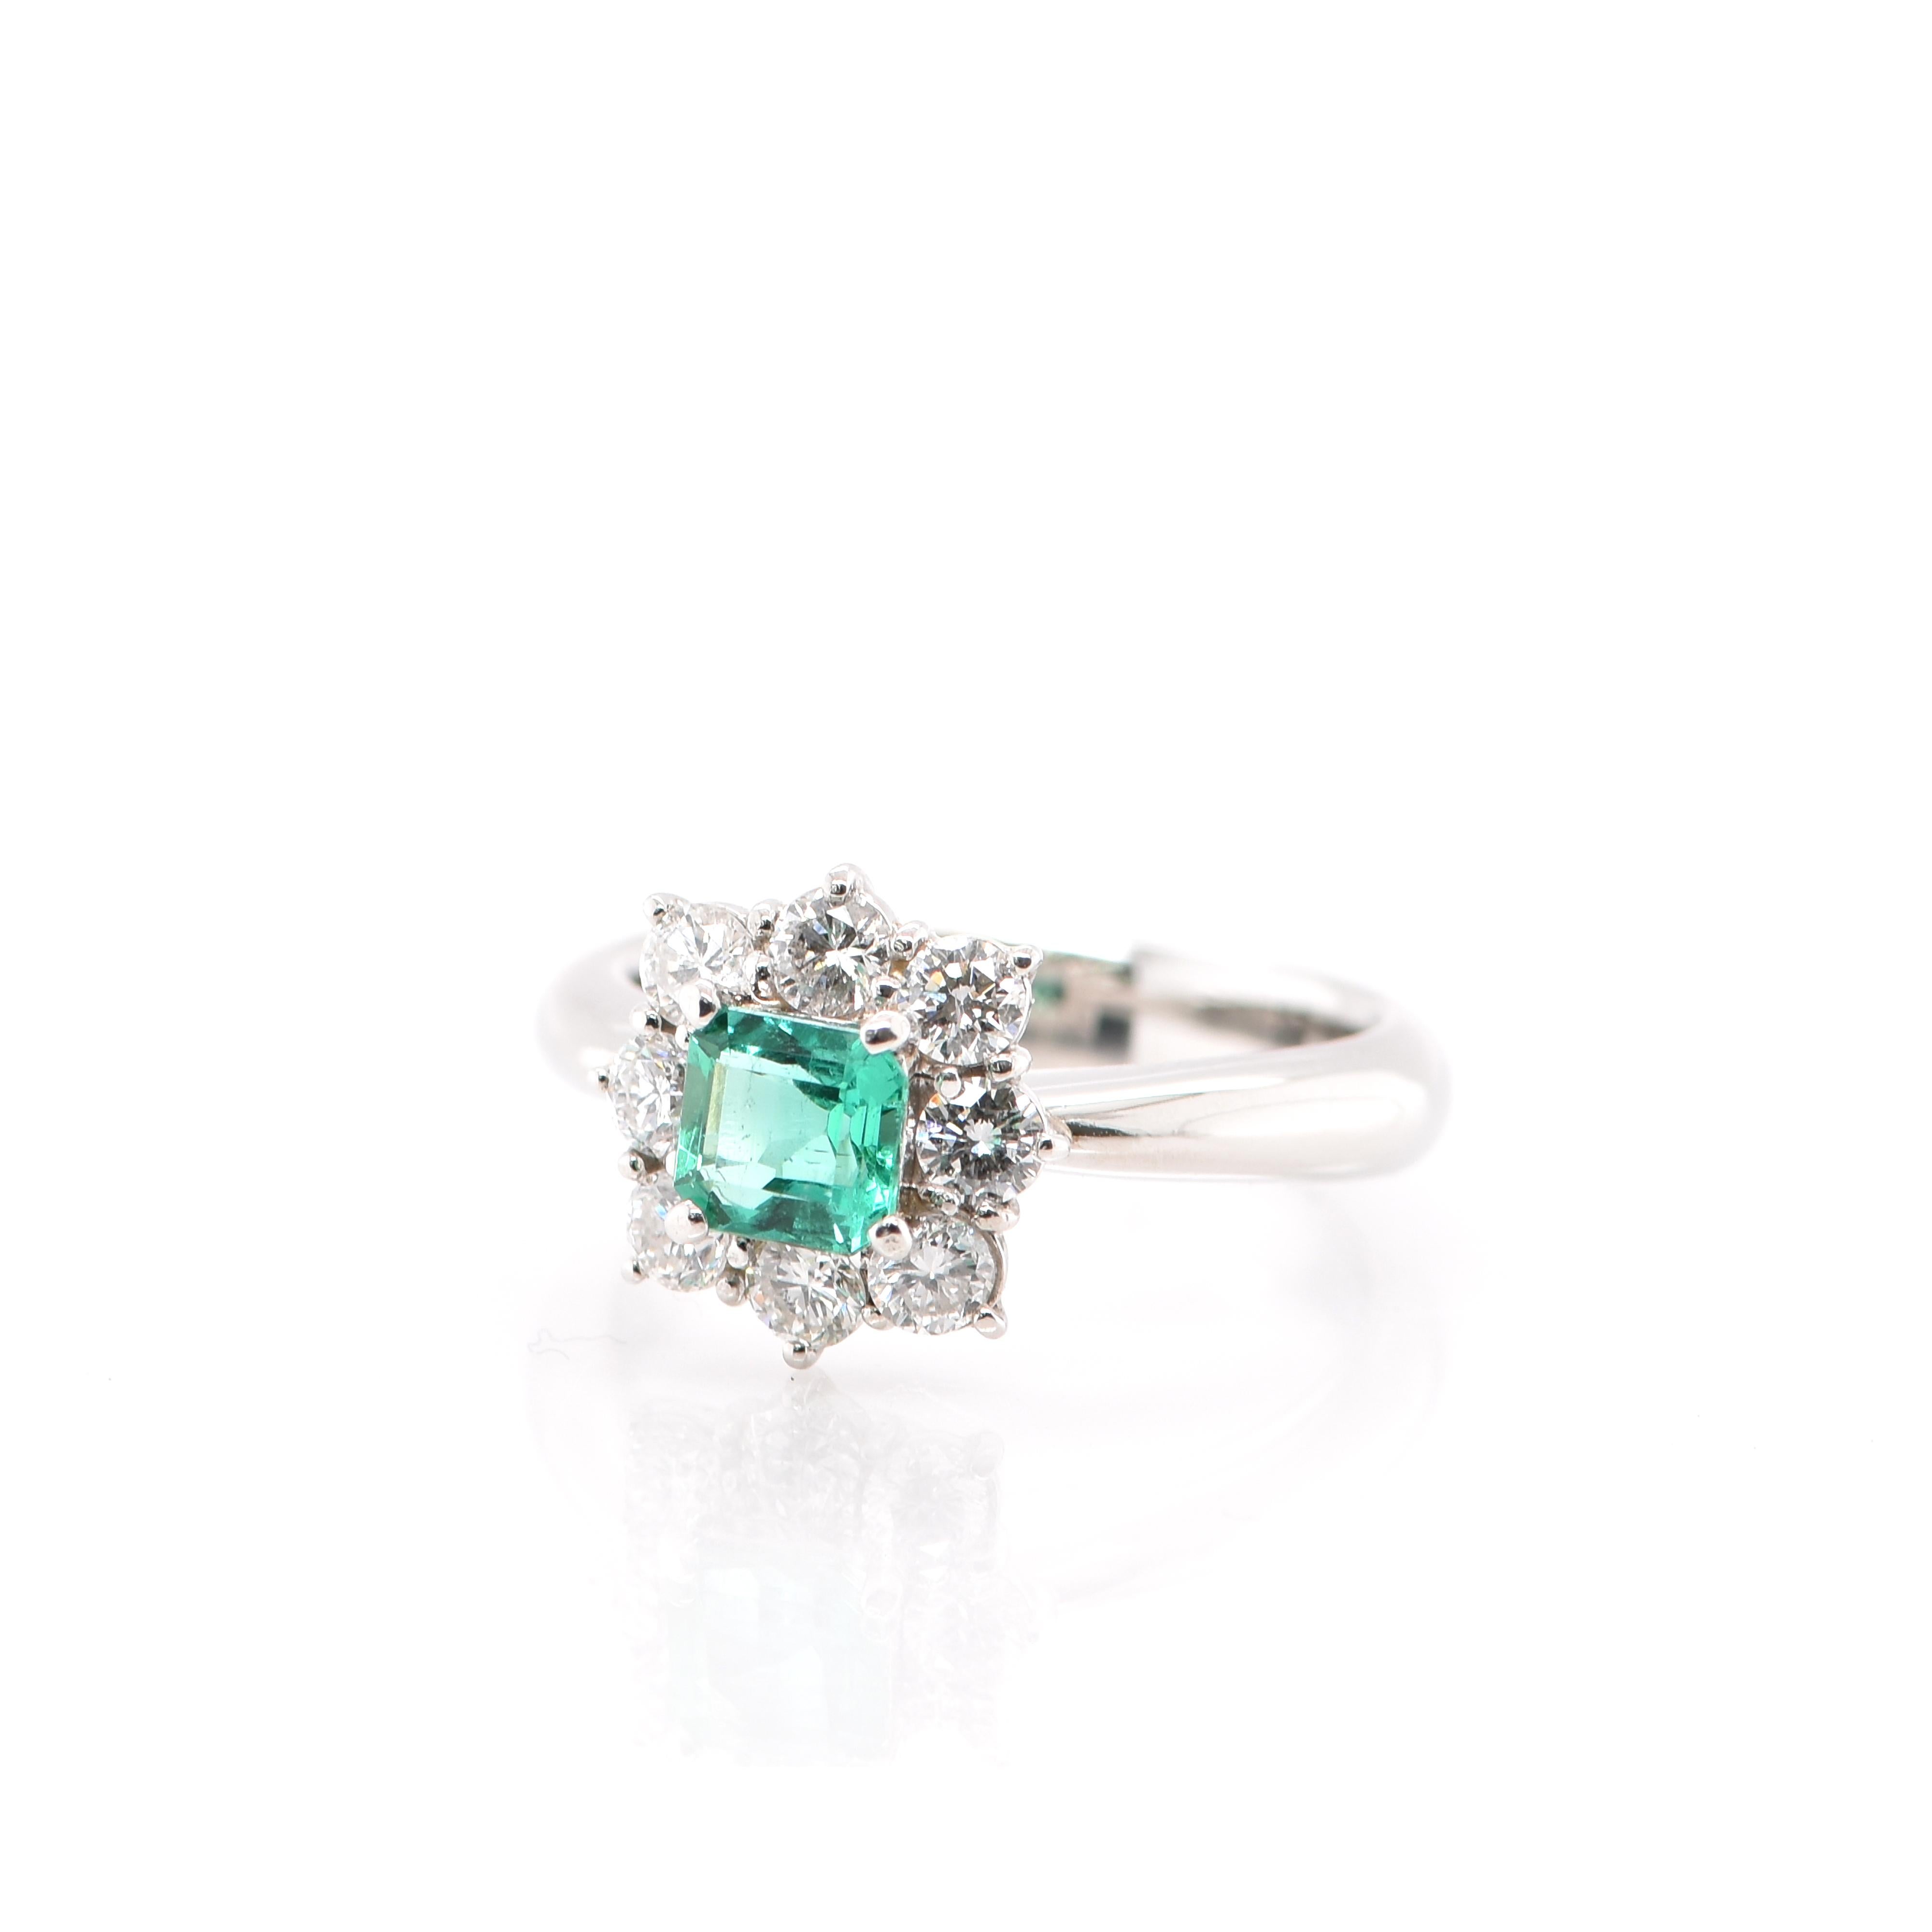 Modern GIA 0.61 Carat No Oil Colombian Emerald and Diamond Ring Set in Platinum